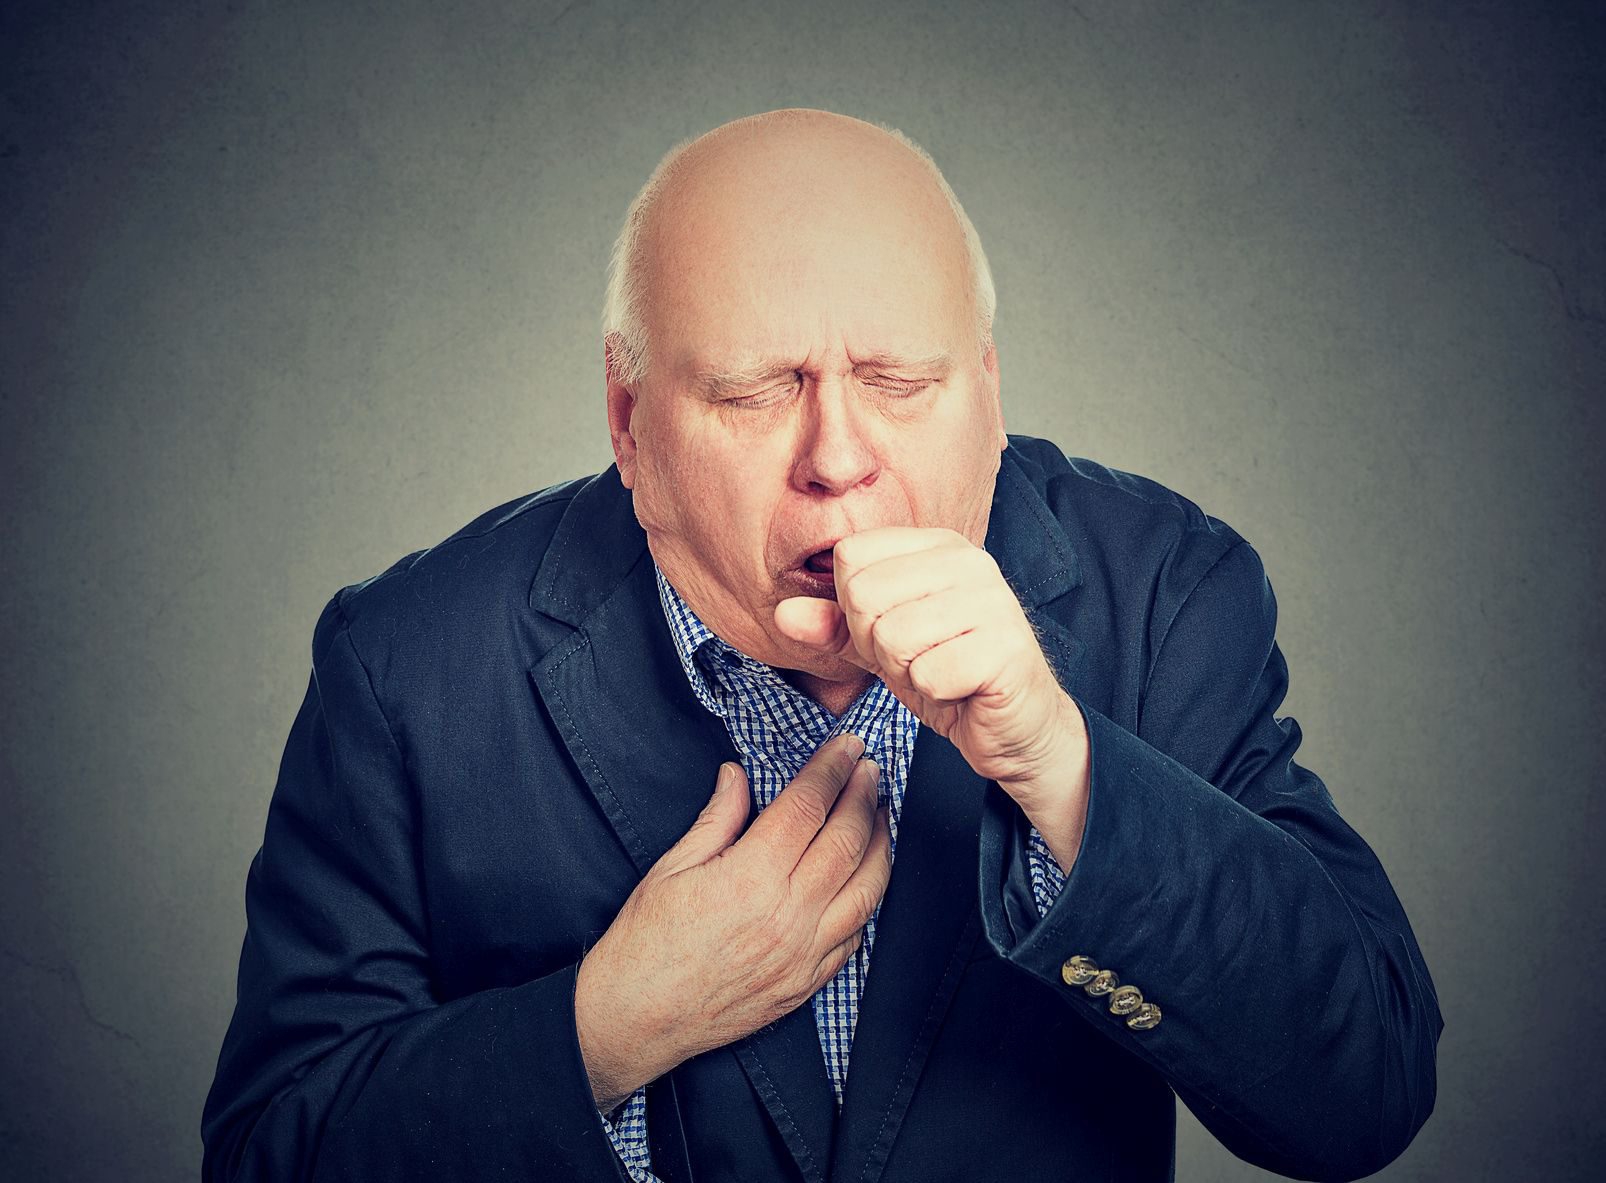 Old man coughing holding fist to mouth isolated on gray background Old man coughing holding fist to mouth